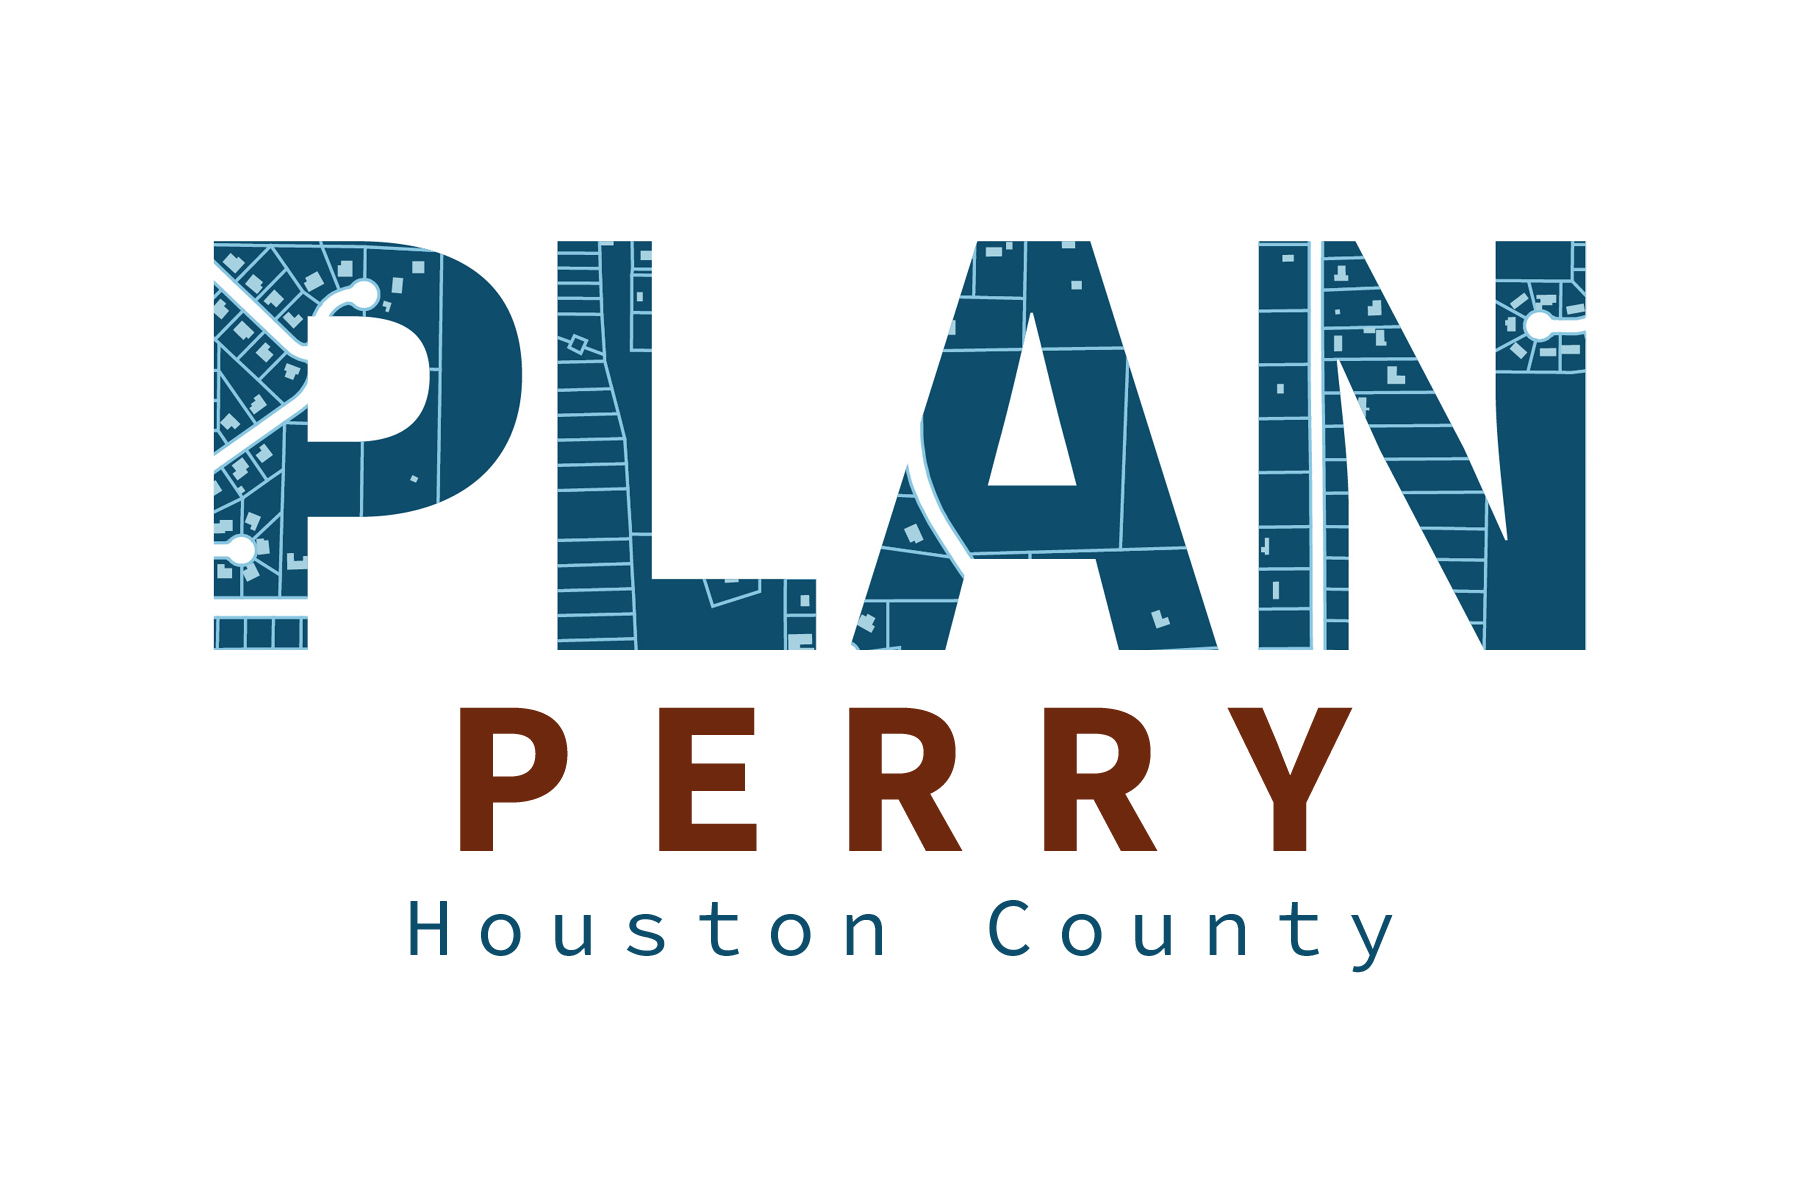 Photo for Citizens Asked to Share Thoughts on Comprehensive Plan